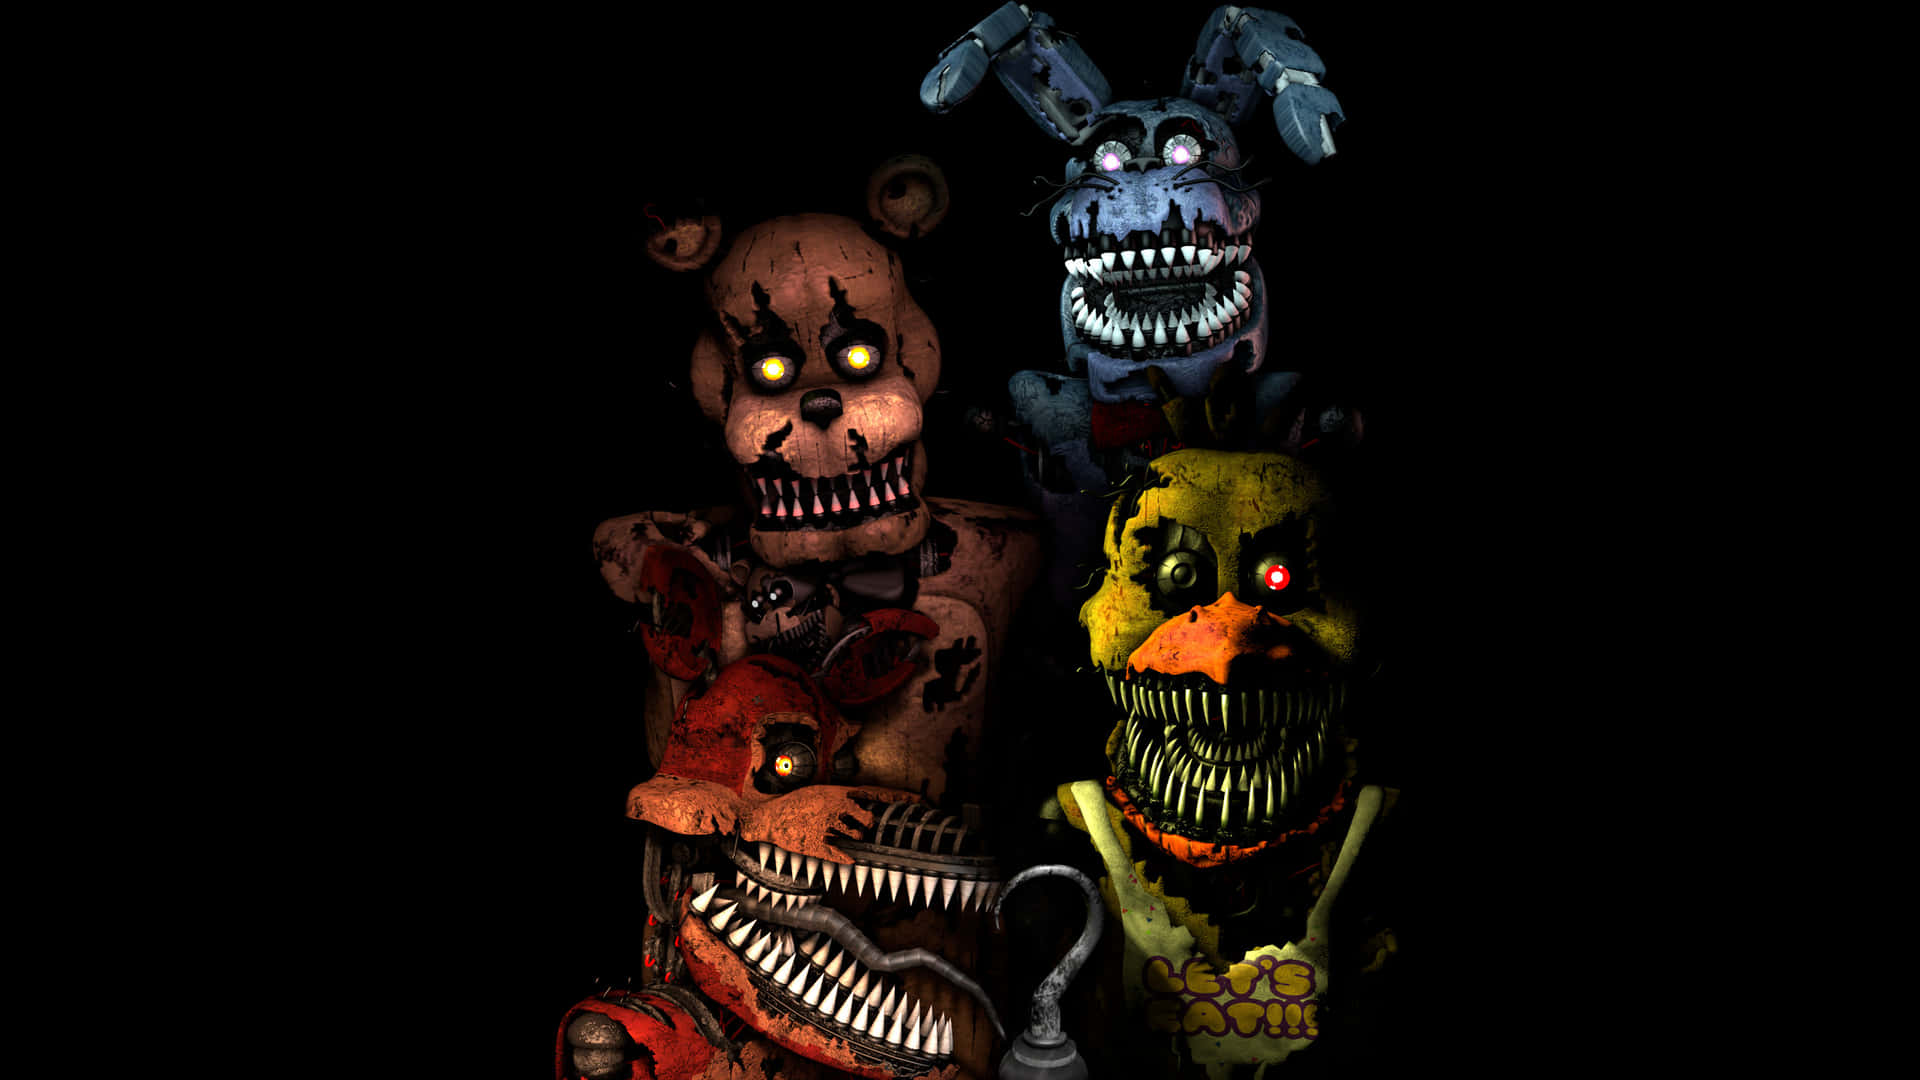 Nightmare Chica Fan Casting for Five Nights At Freddy's 4: The